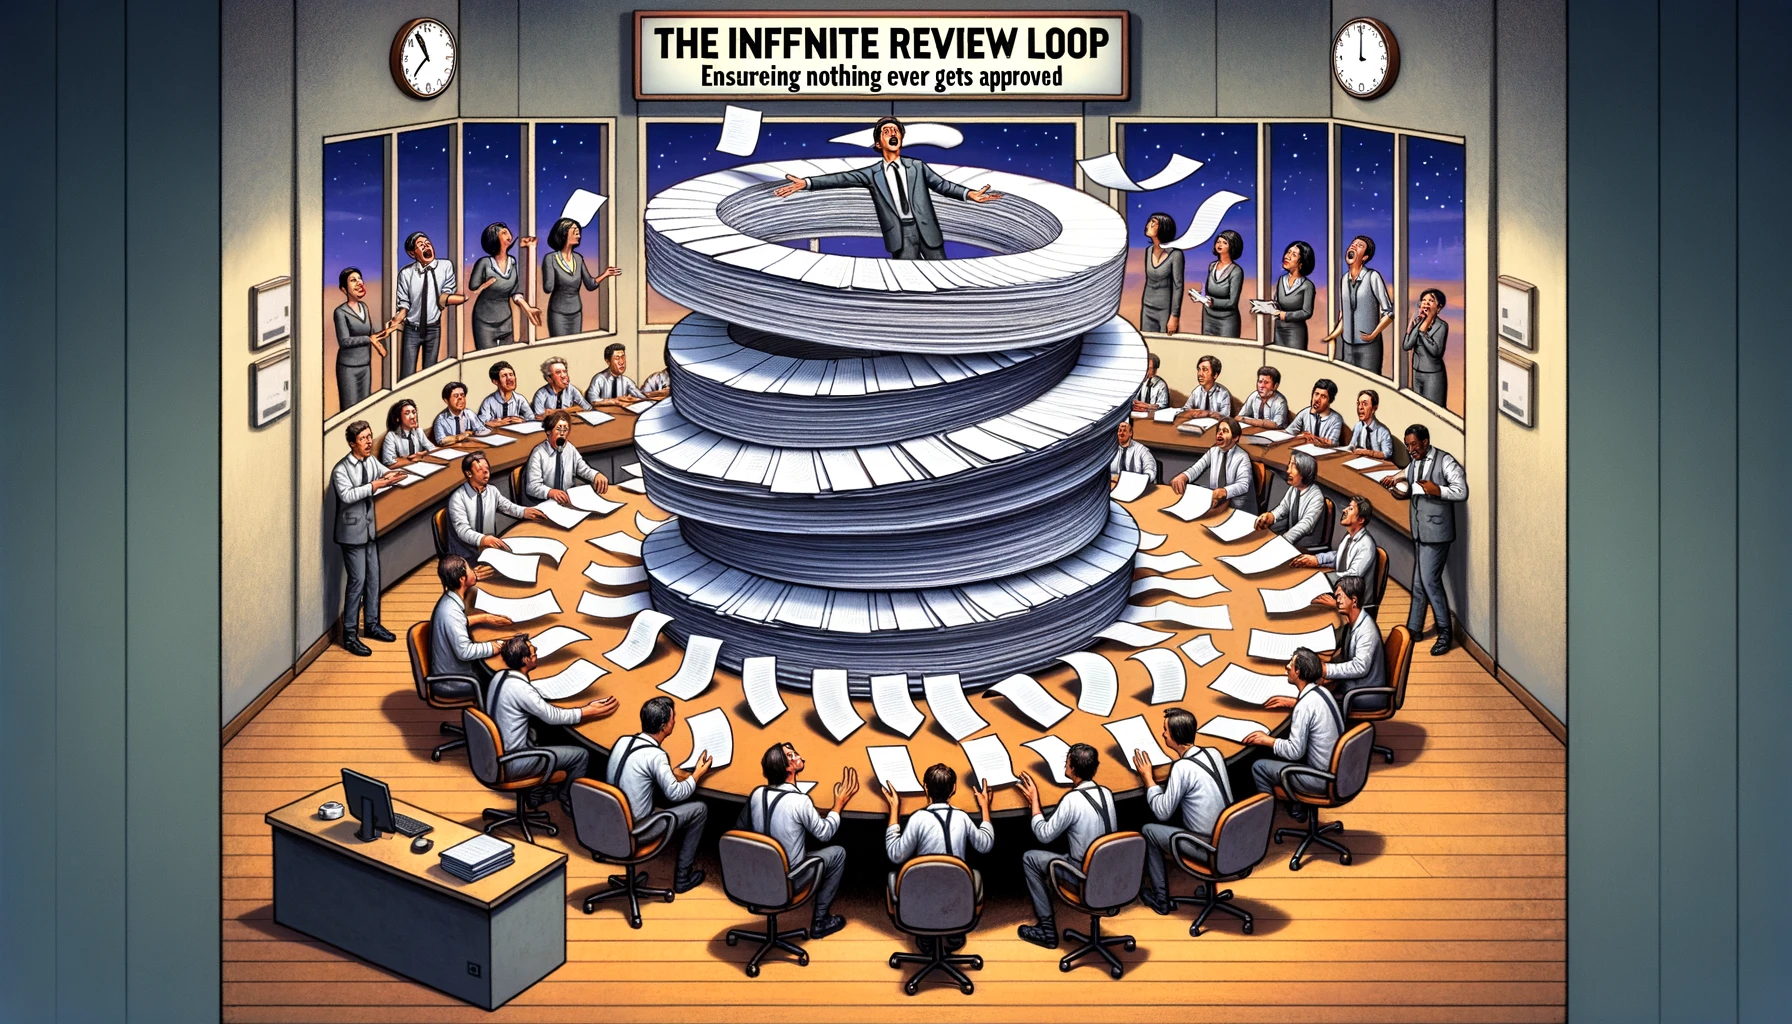 The Infinite Review Loop: Ensuring Nothing Ever Gets Approved